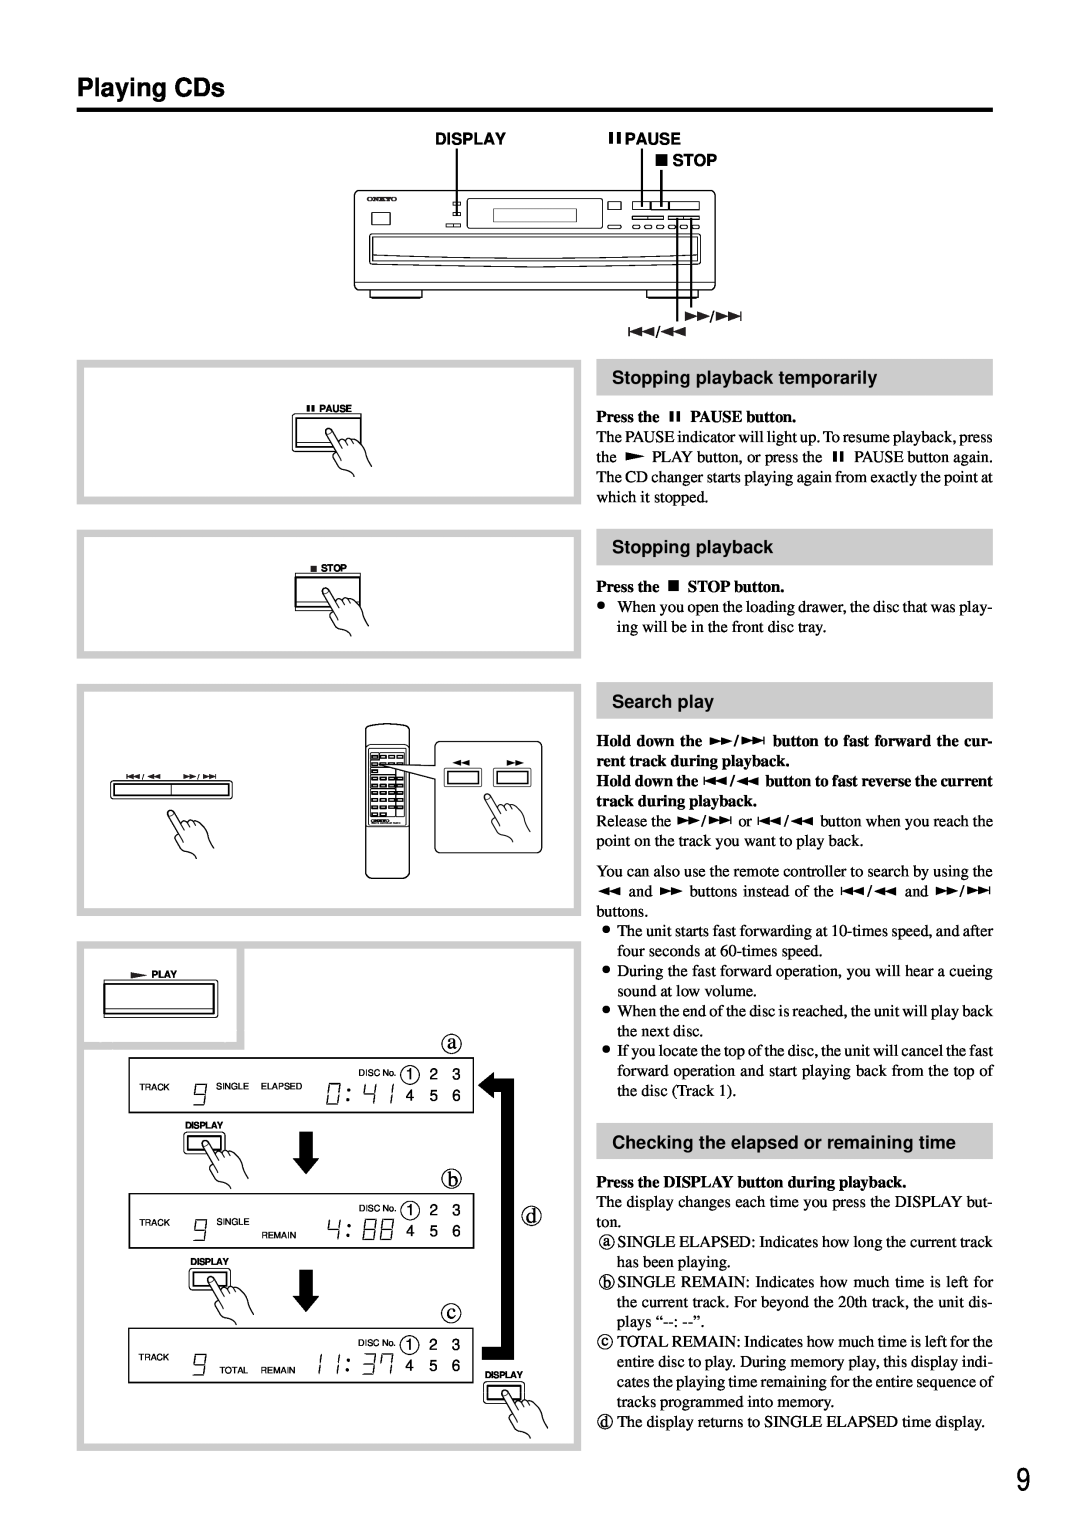 Onkyo DX-C380 instruction manual Playing CDs, Stopping playback temporarily, Search play, Display, Pause 